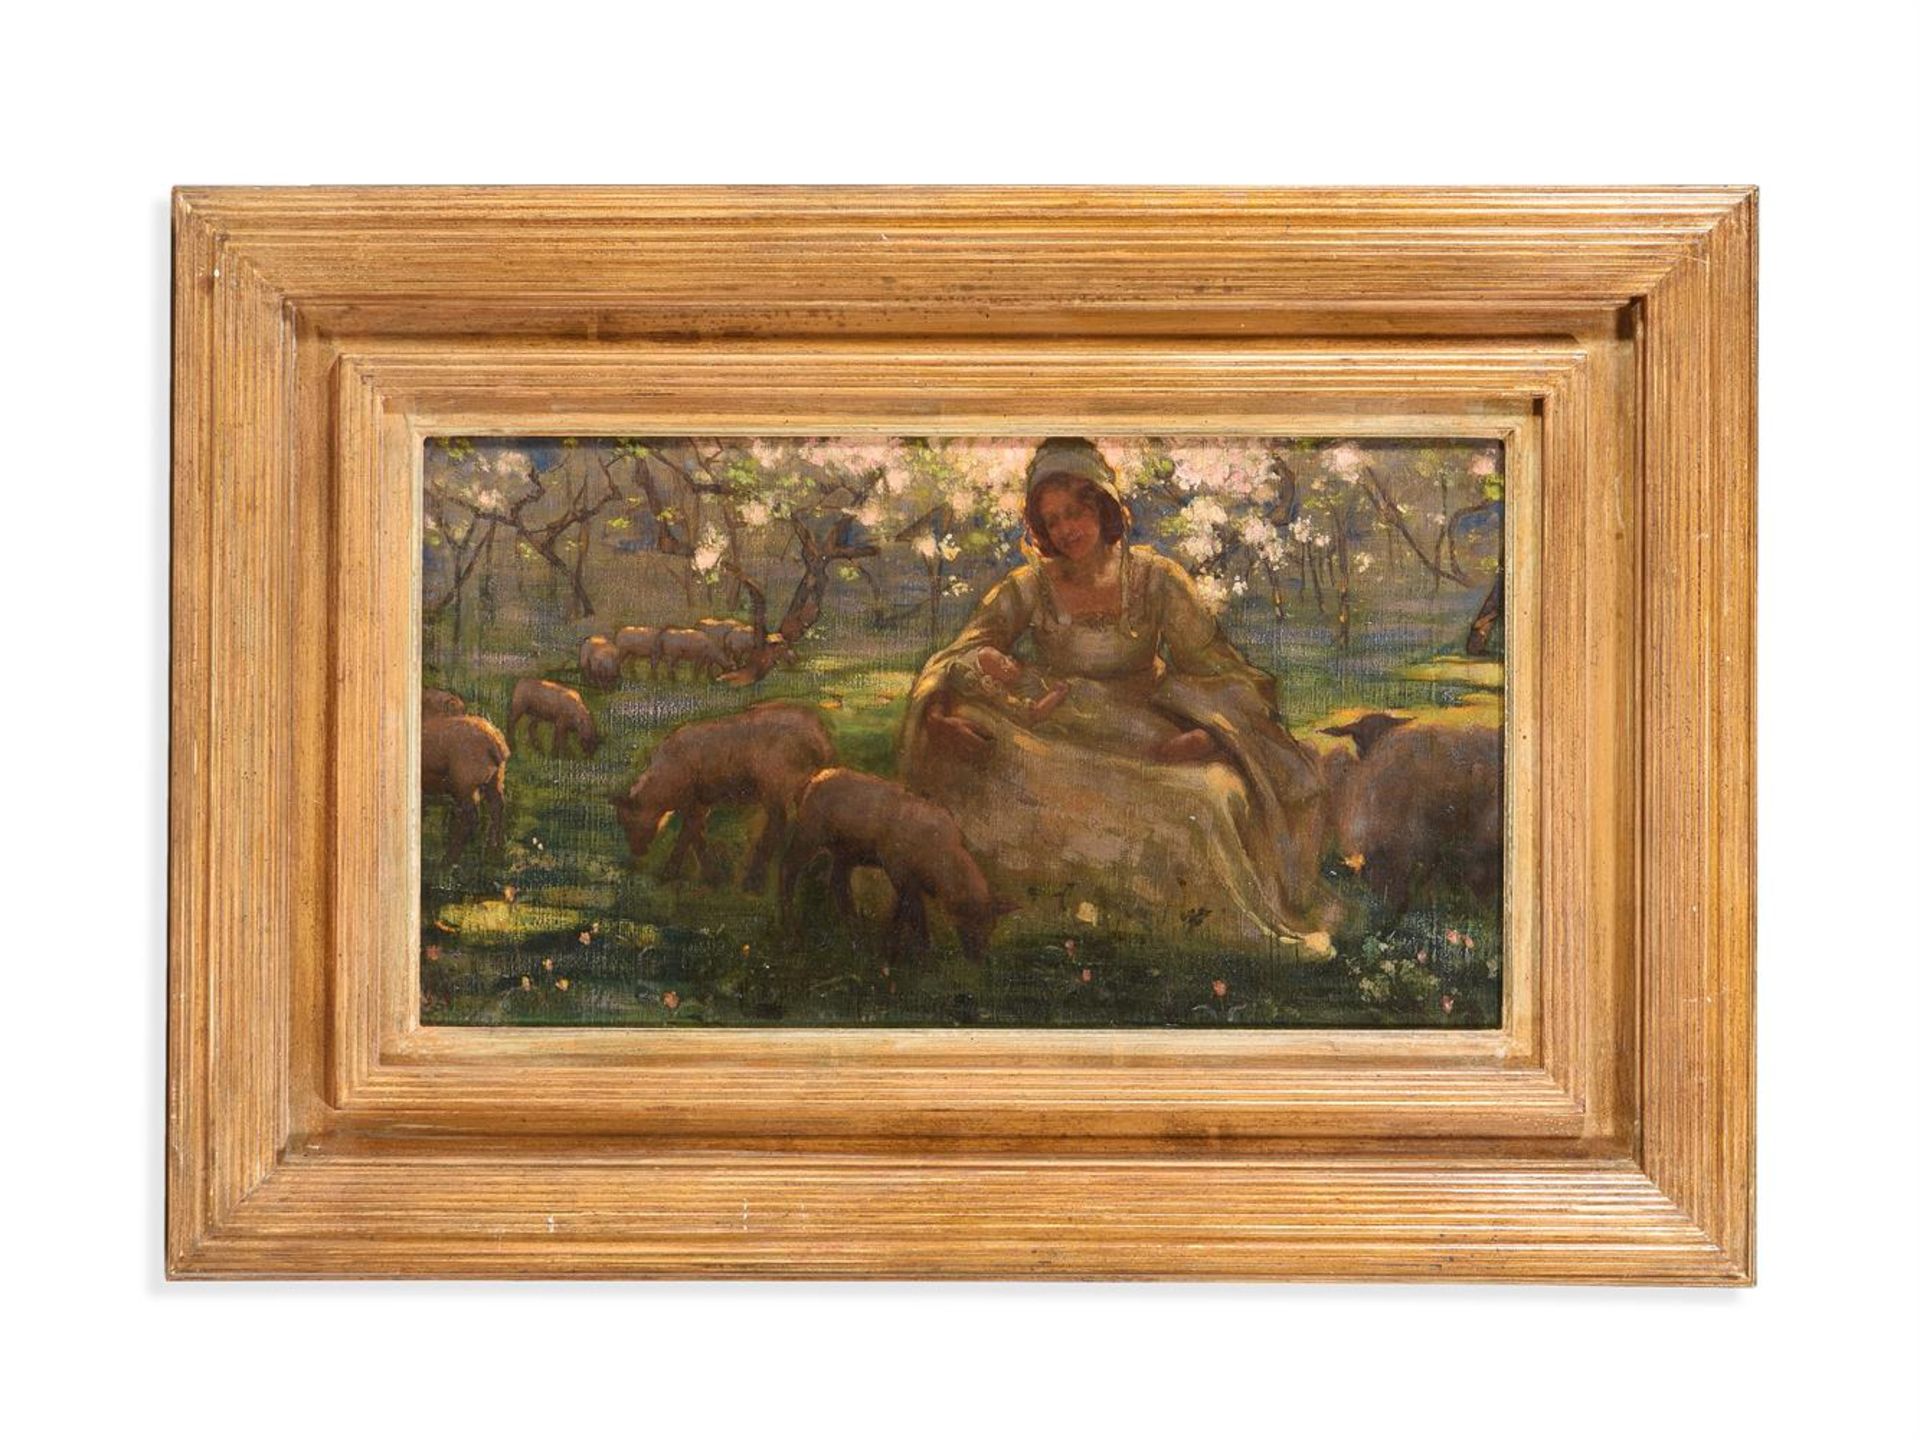 ENGLISH SCHOOL (19TH CENTURY), MOTHER AND CHILD IN AN ORCHARD WITH SHEEP